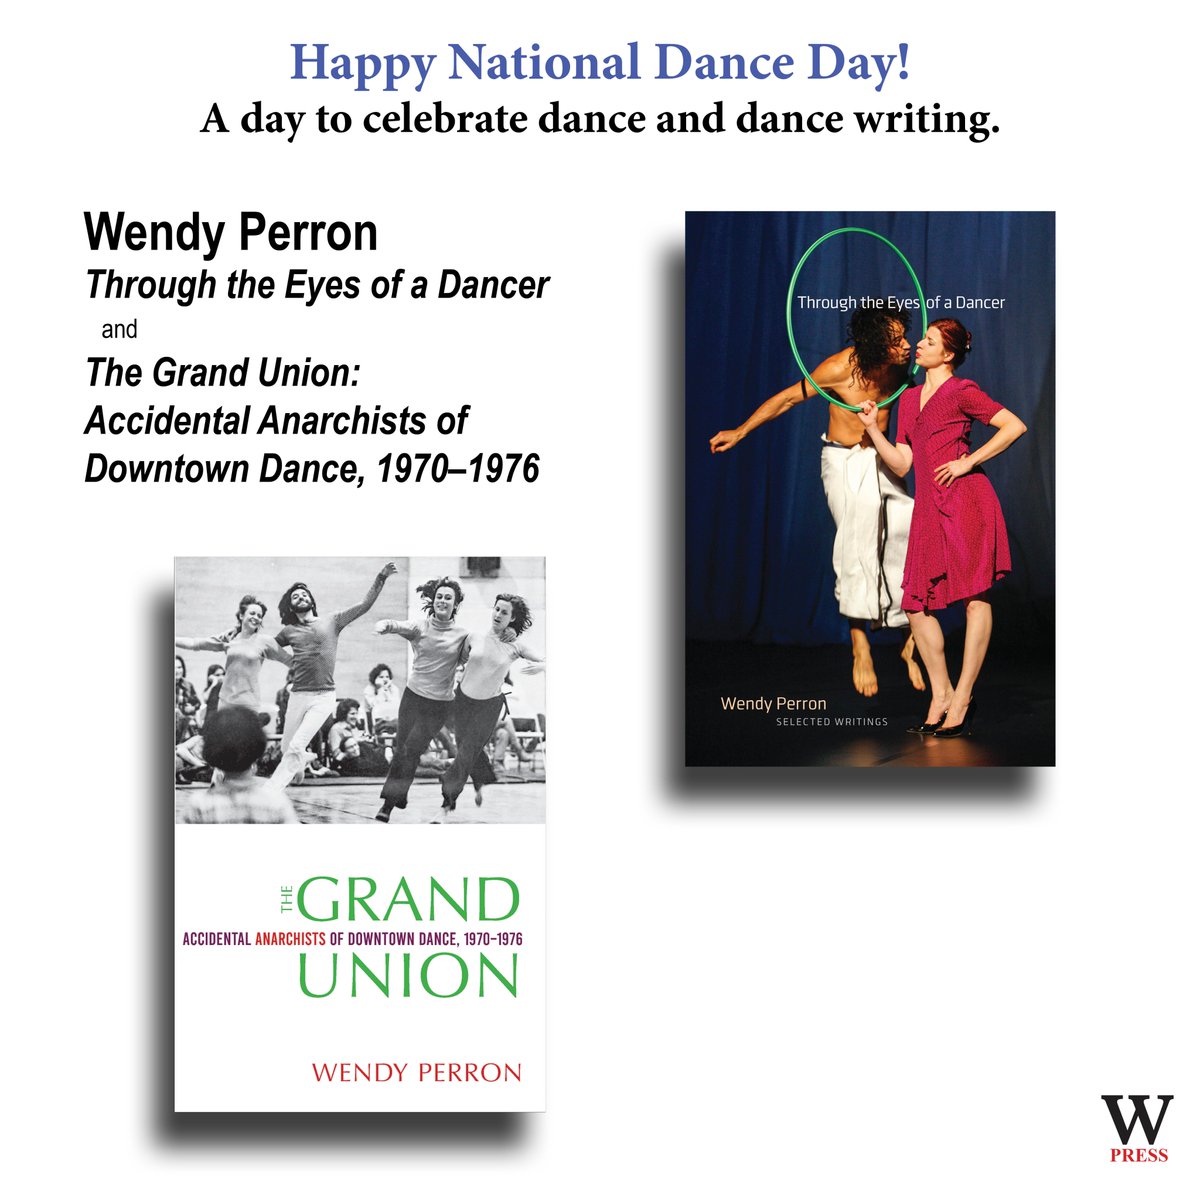 test Twitter Media - Happy National Dance Day! 
#NationalDanceDay #KeepDancing #KeepReading #ReadUP #supportdance https://t.co/BmpenrLByi